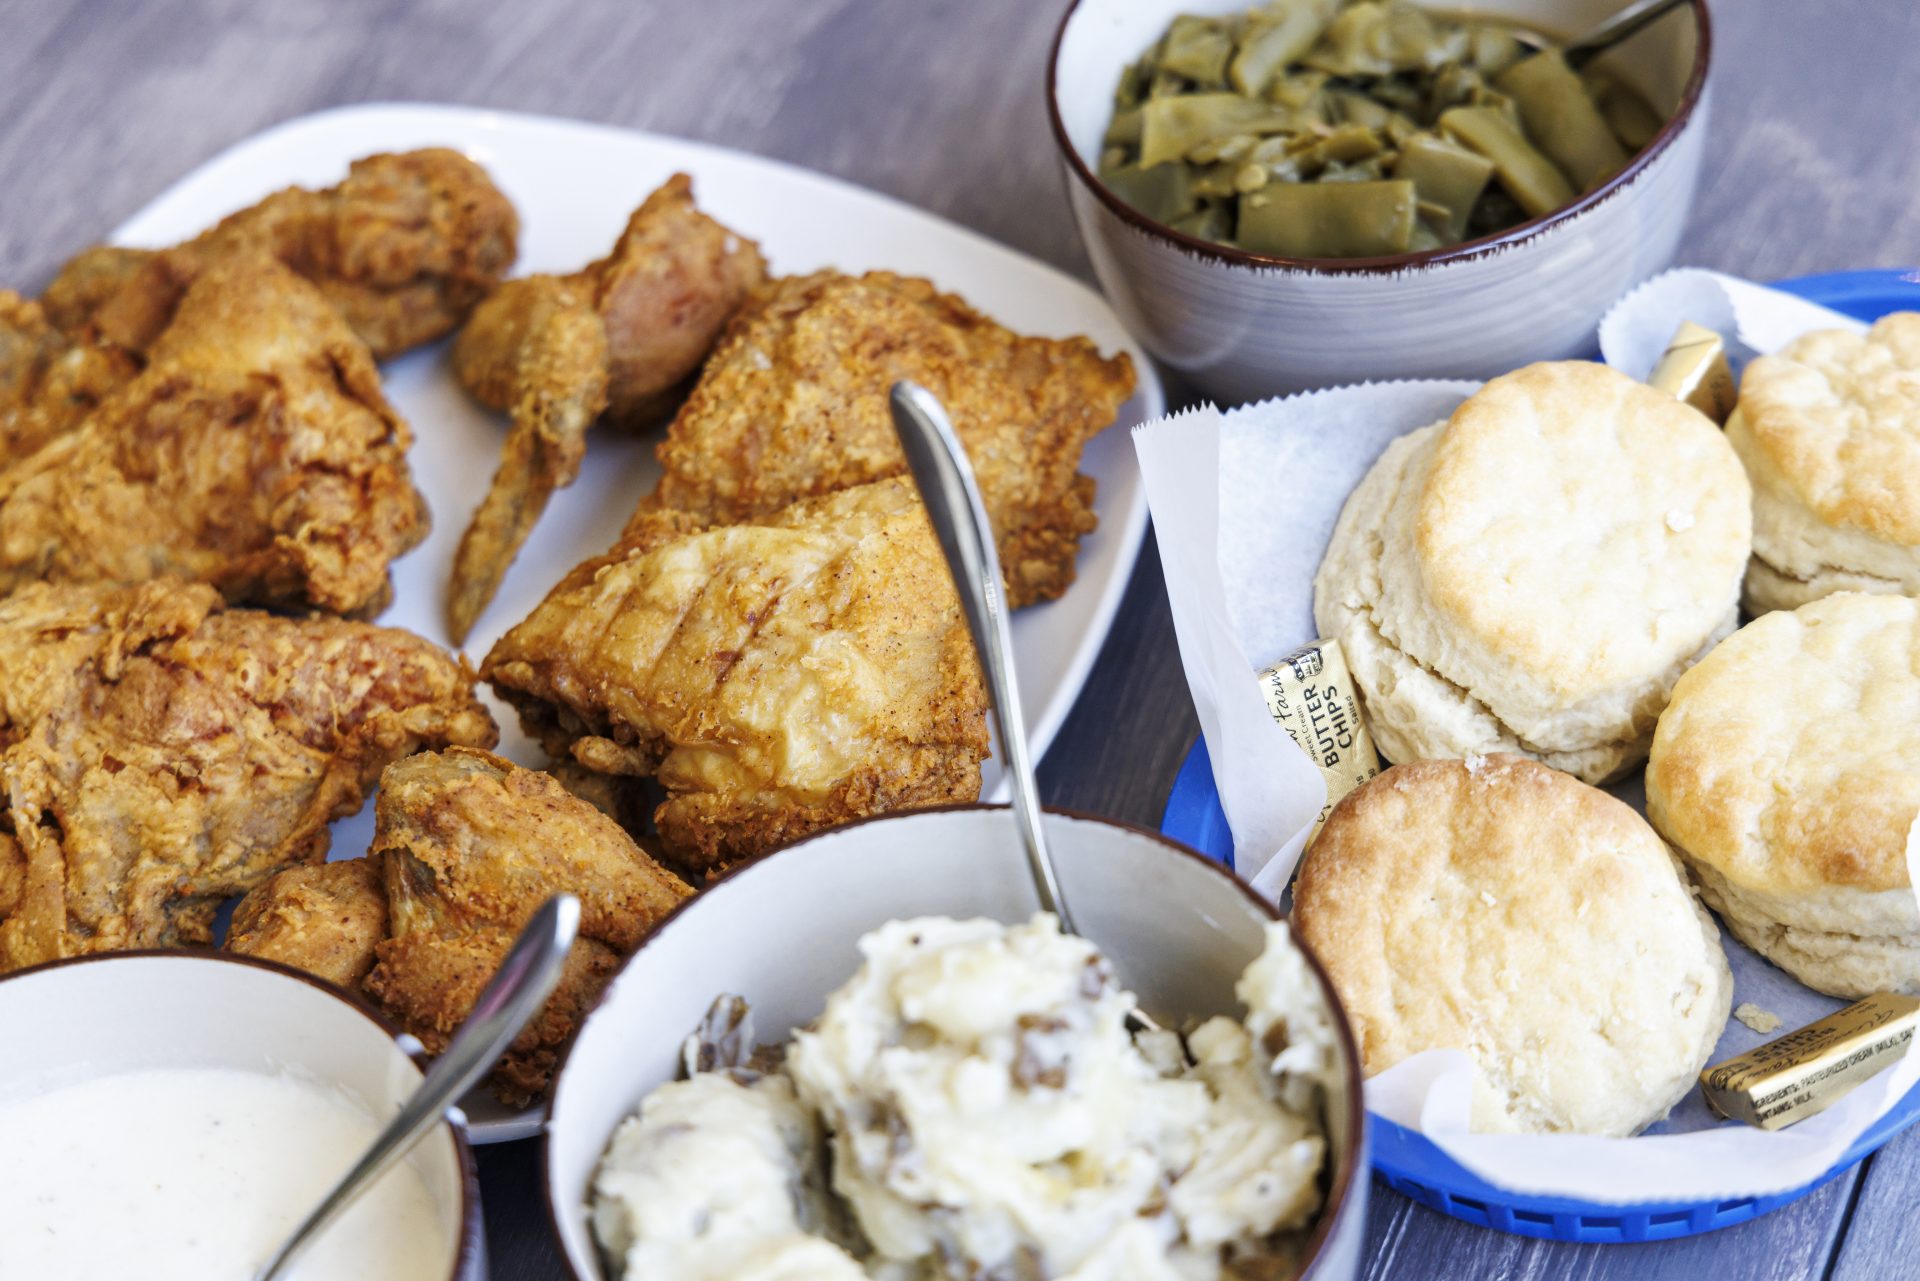 dishes of food on table: fried chicken, green beans, smashed potatoes, biscuits